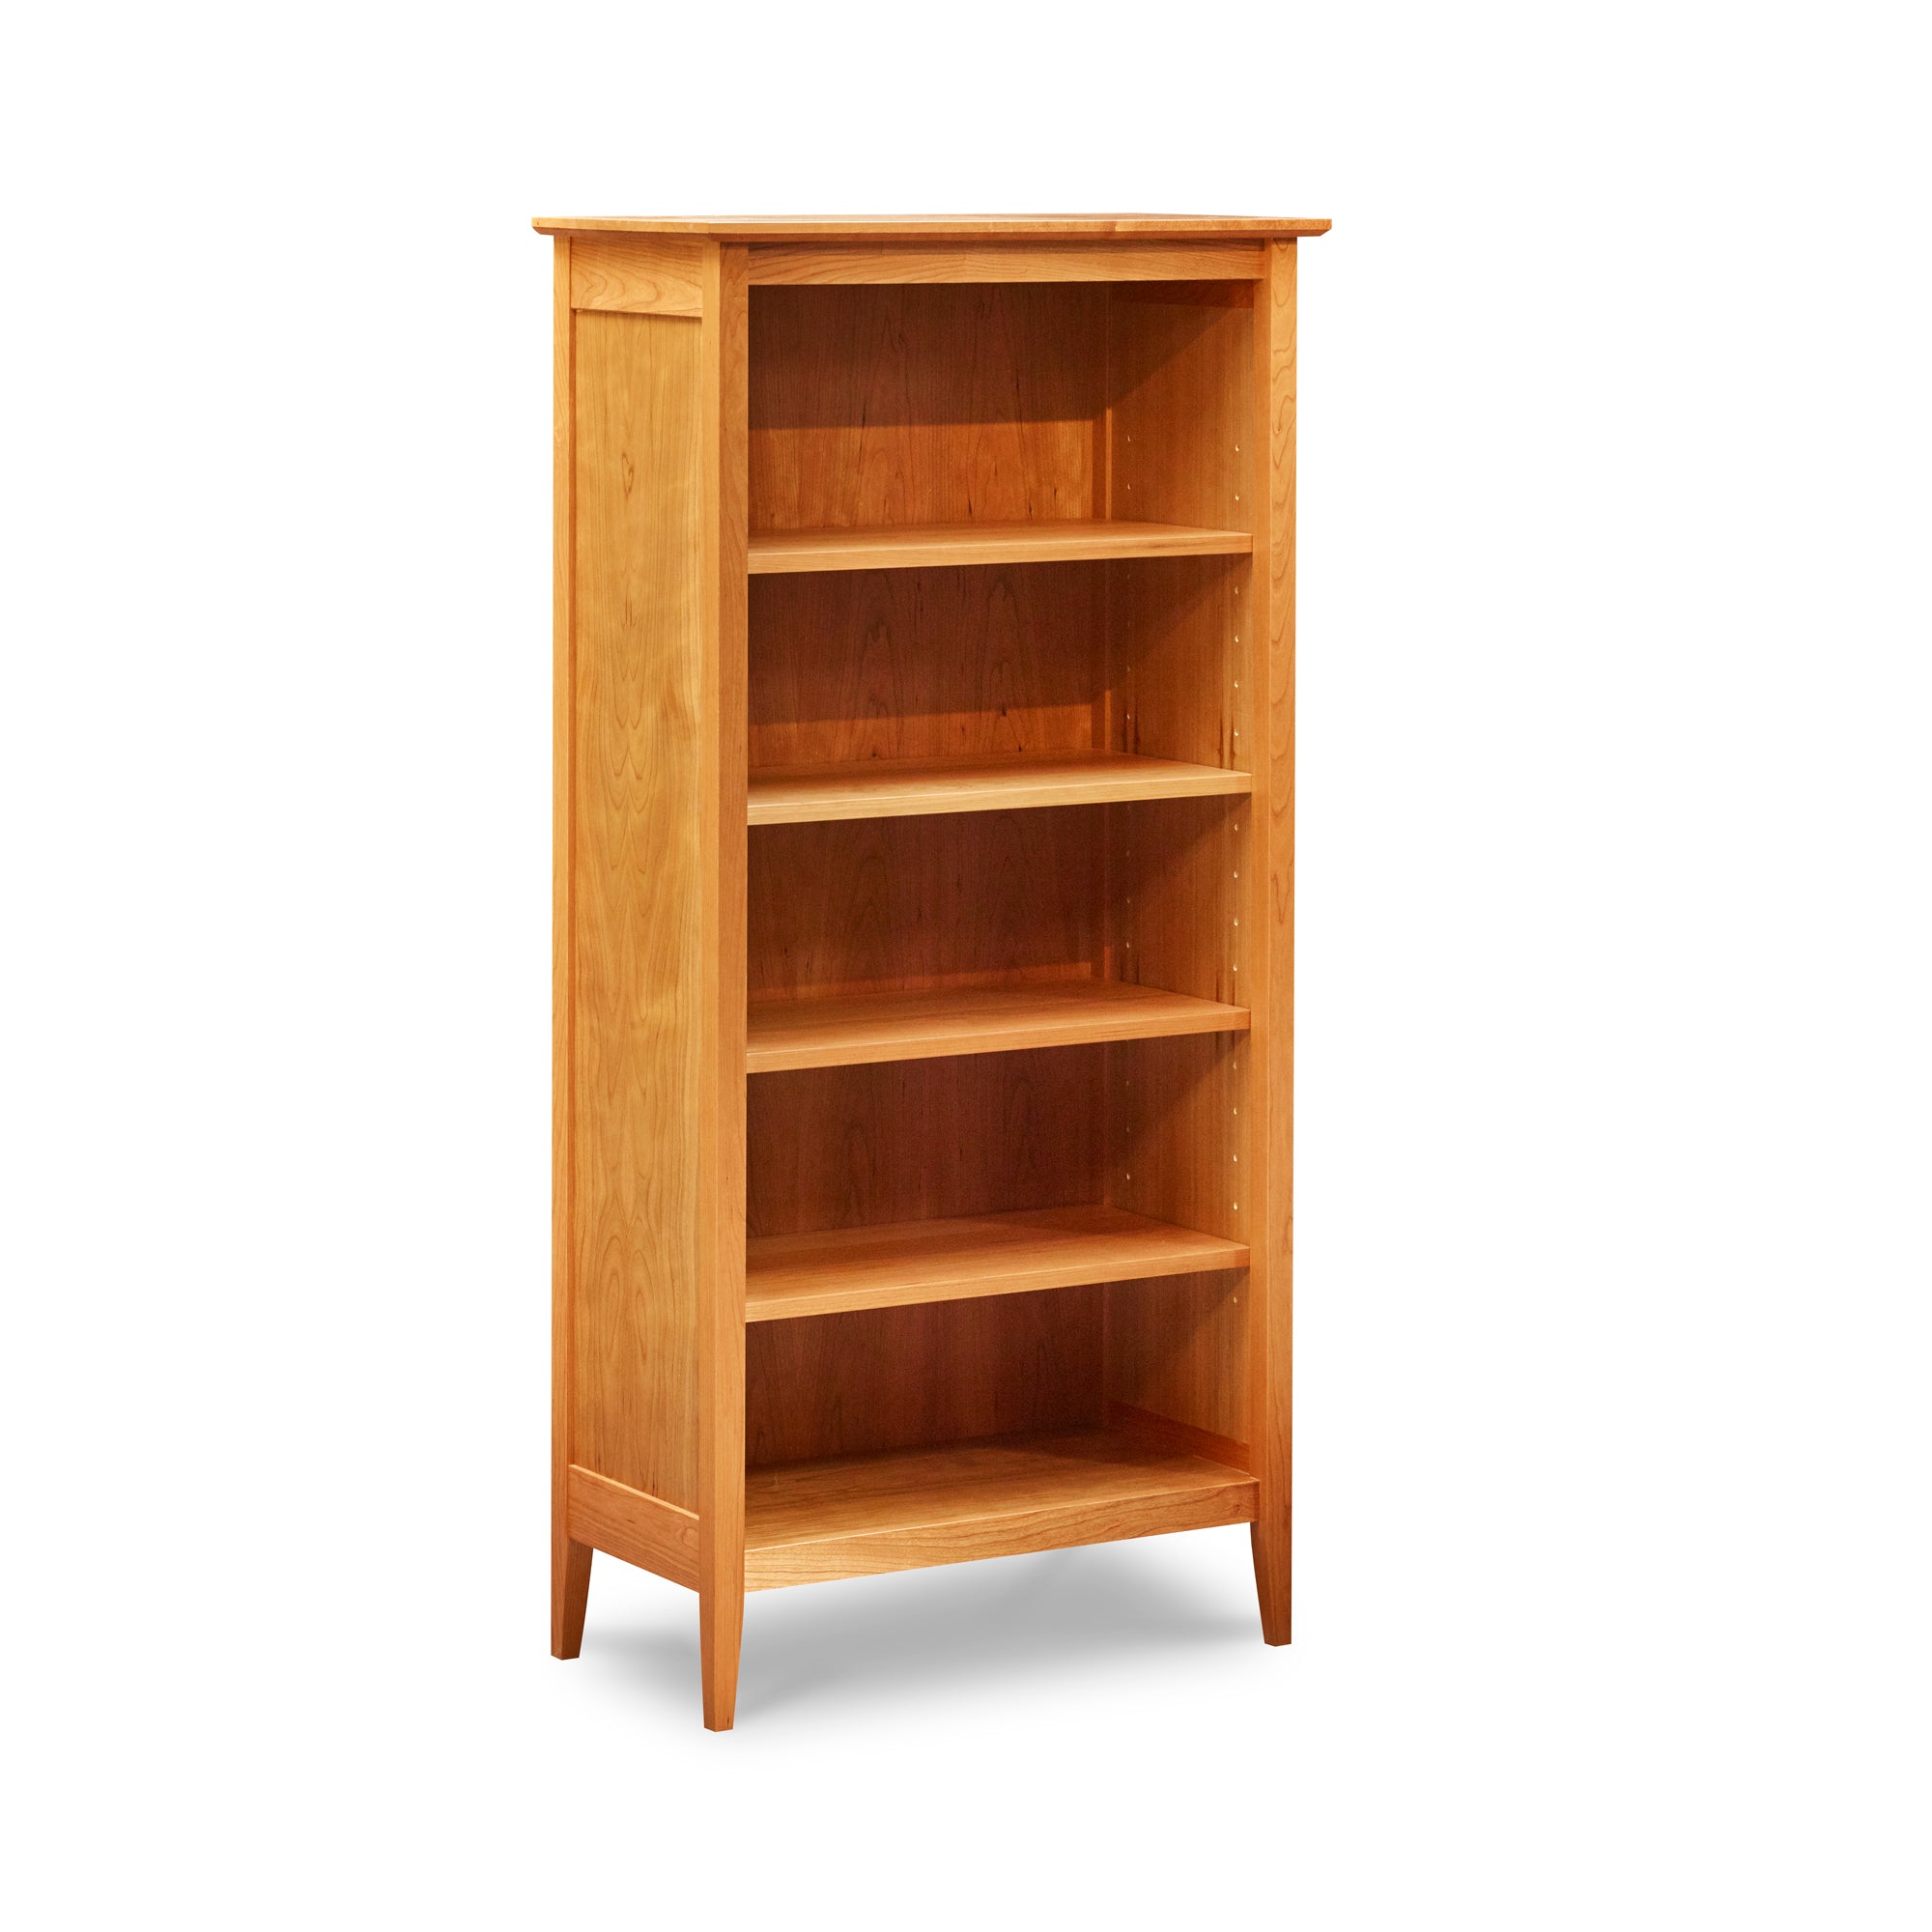 Five foot Shaker style bookcase with tapered legs in cherry